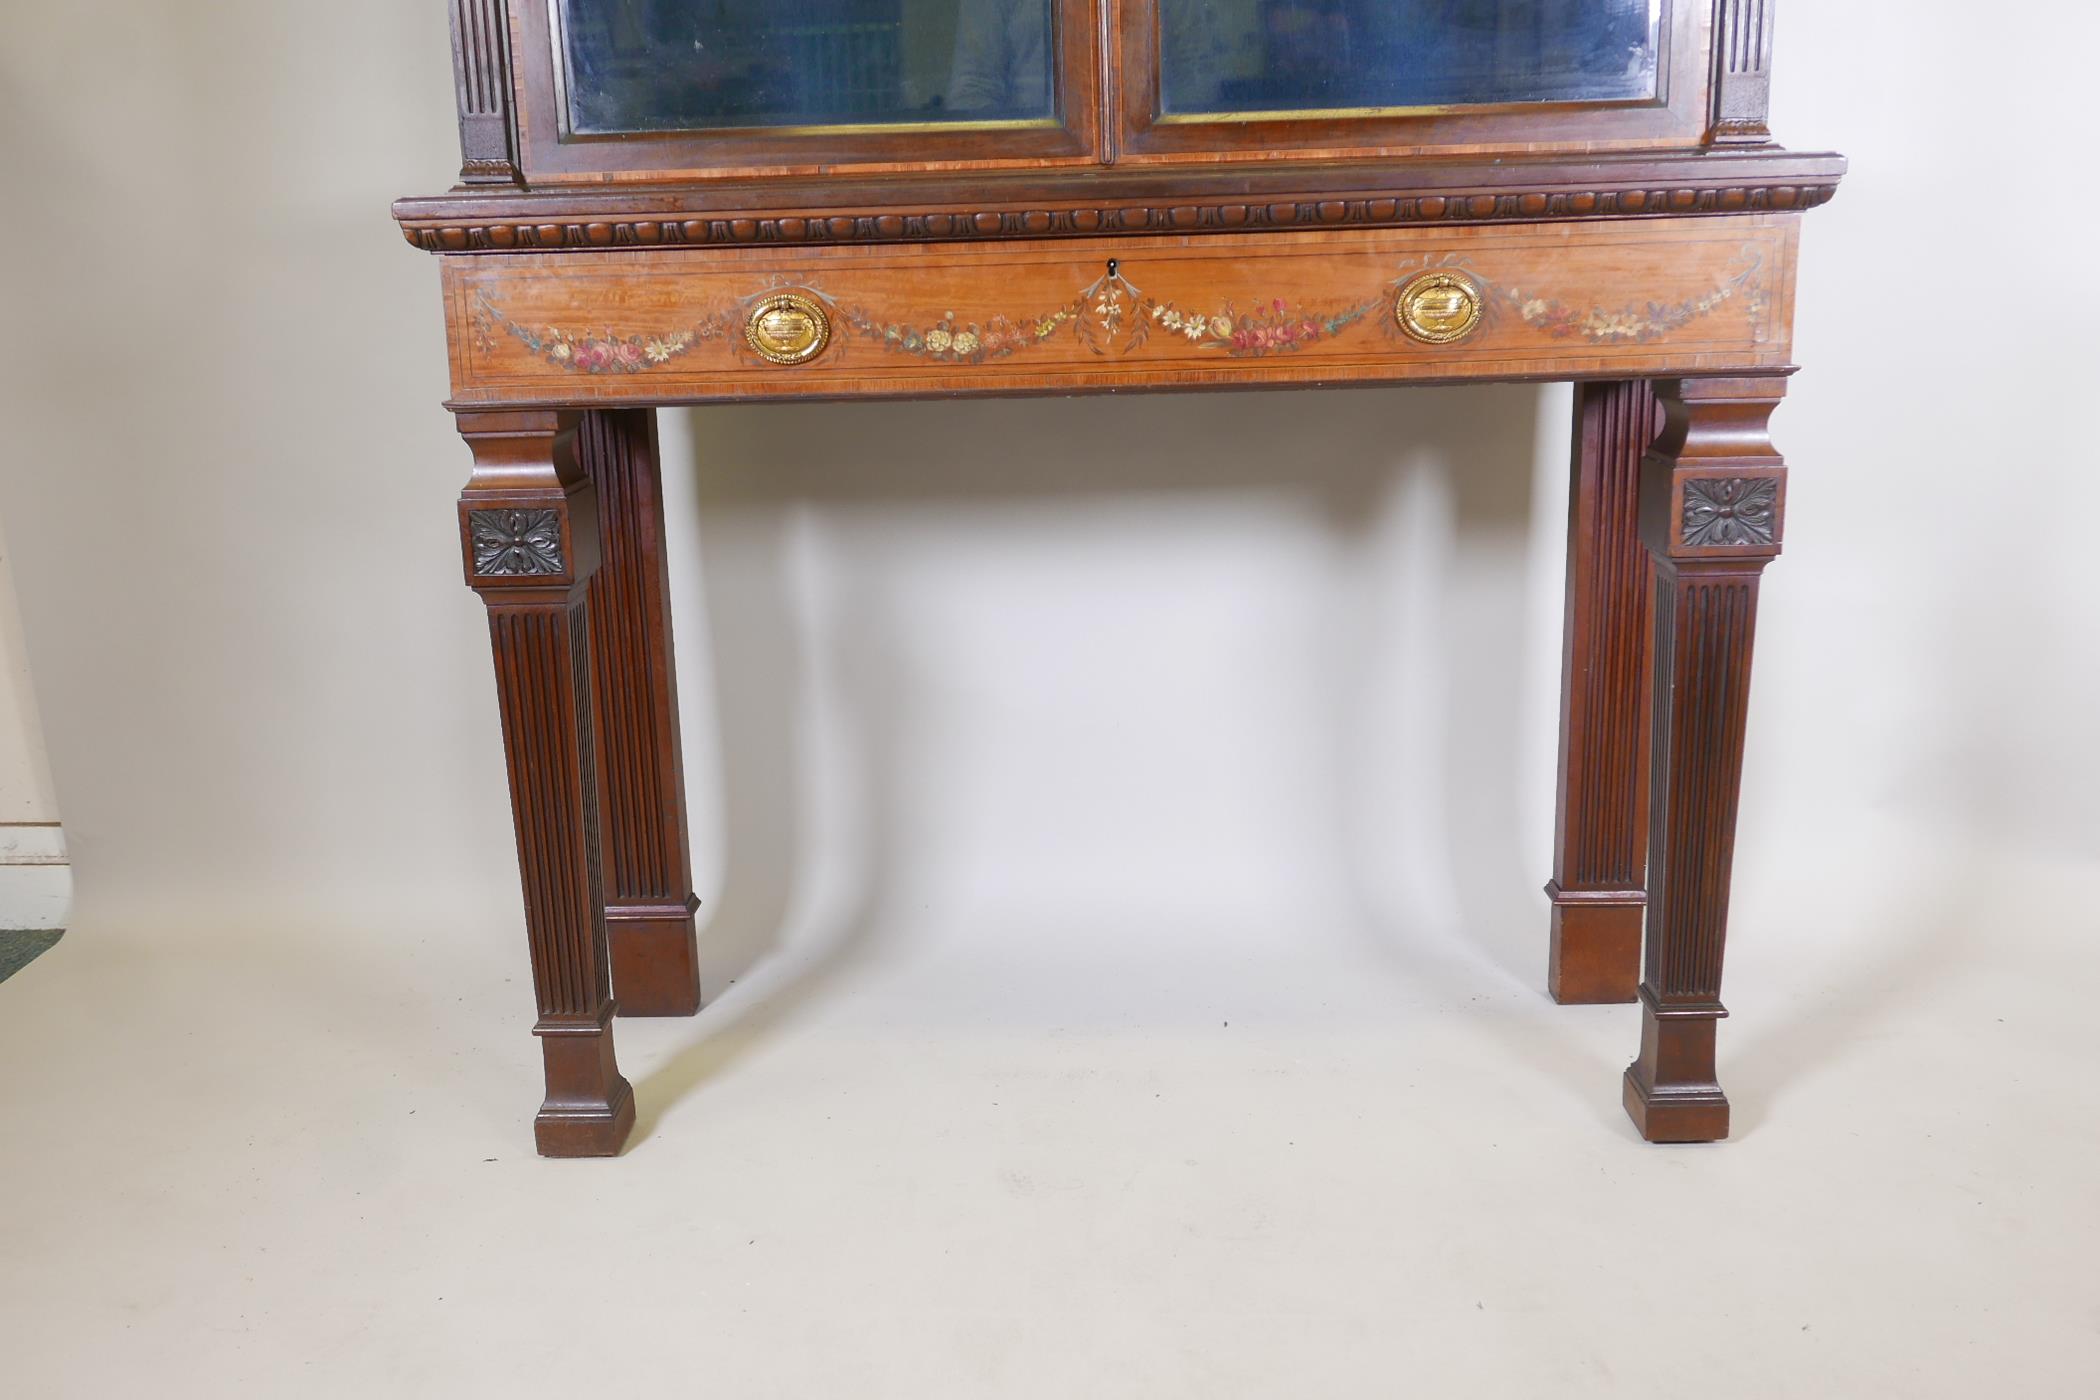 A C19th mahogany two section mahogany display cabinet, with satinwood banded inlay and painted - Image 2 of 8